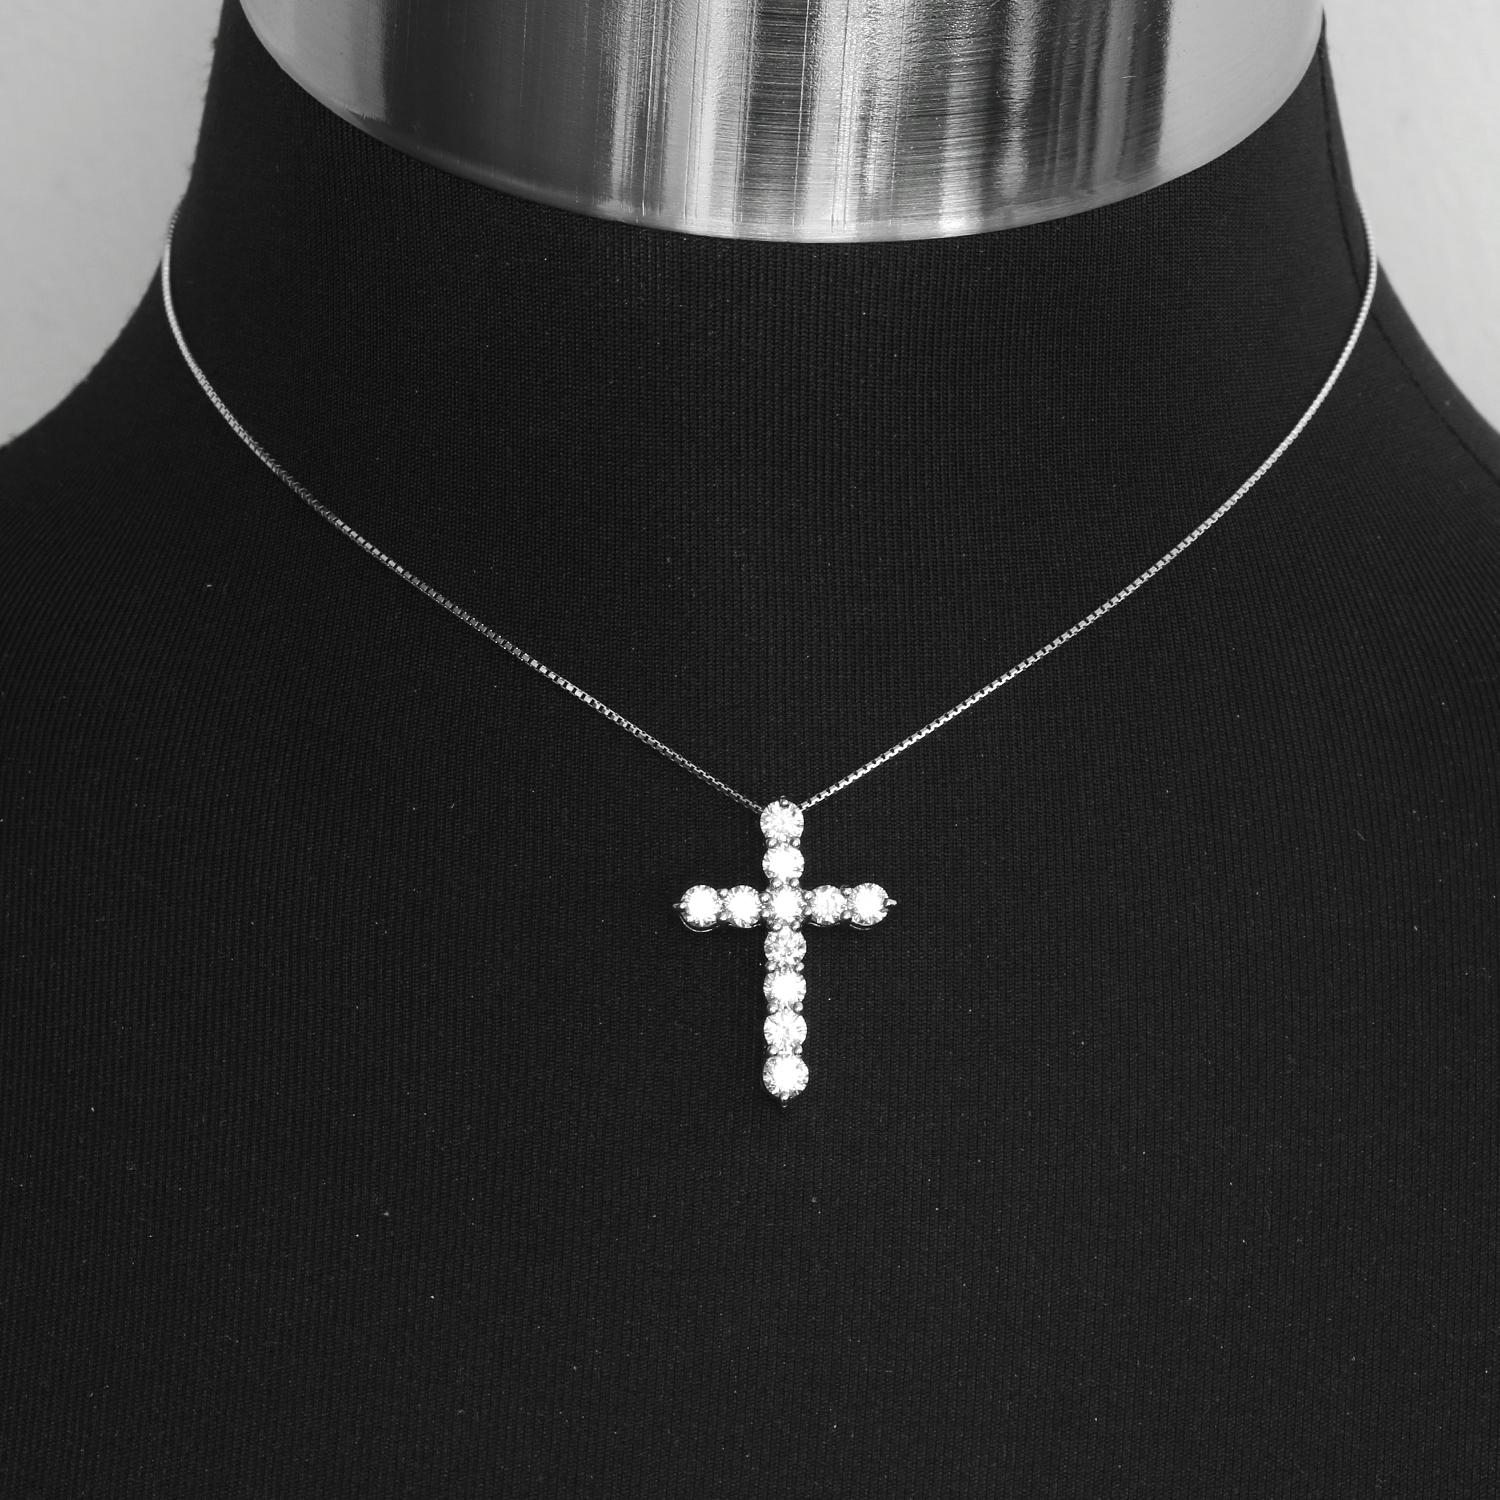 Platinum Diamond Cross Pendant Necklace -  18k white gold necklace with a Platinum cross pendant. Platinum cross pendant diamond weighing 2 carats. Pendant measures apx. 1 inch. Chain measures apx. 15 inches in length.  H-I in color and VS2 in